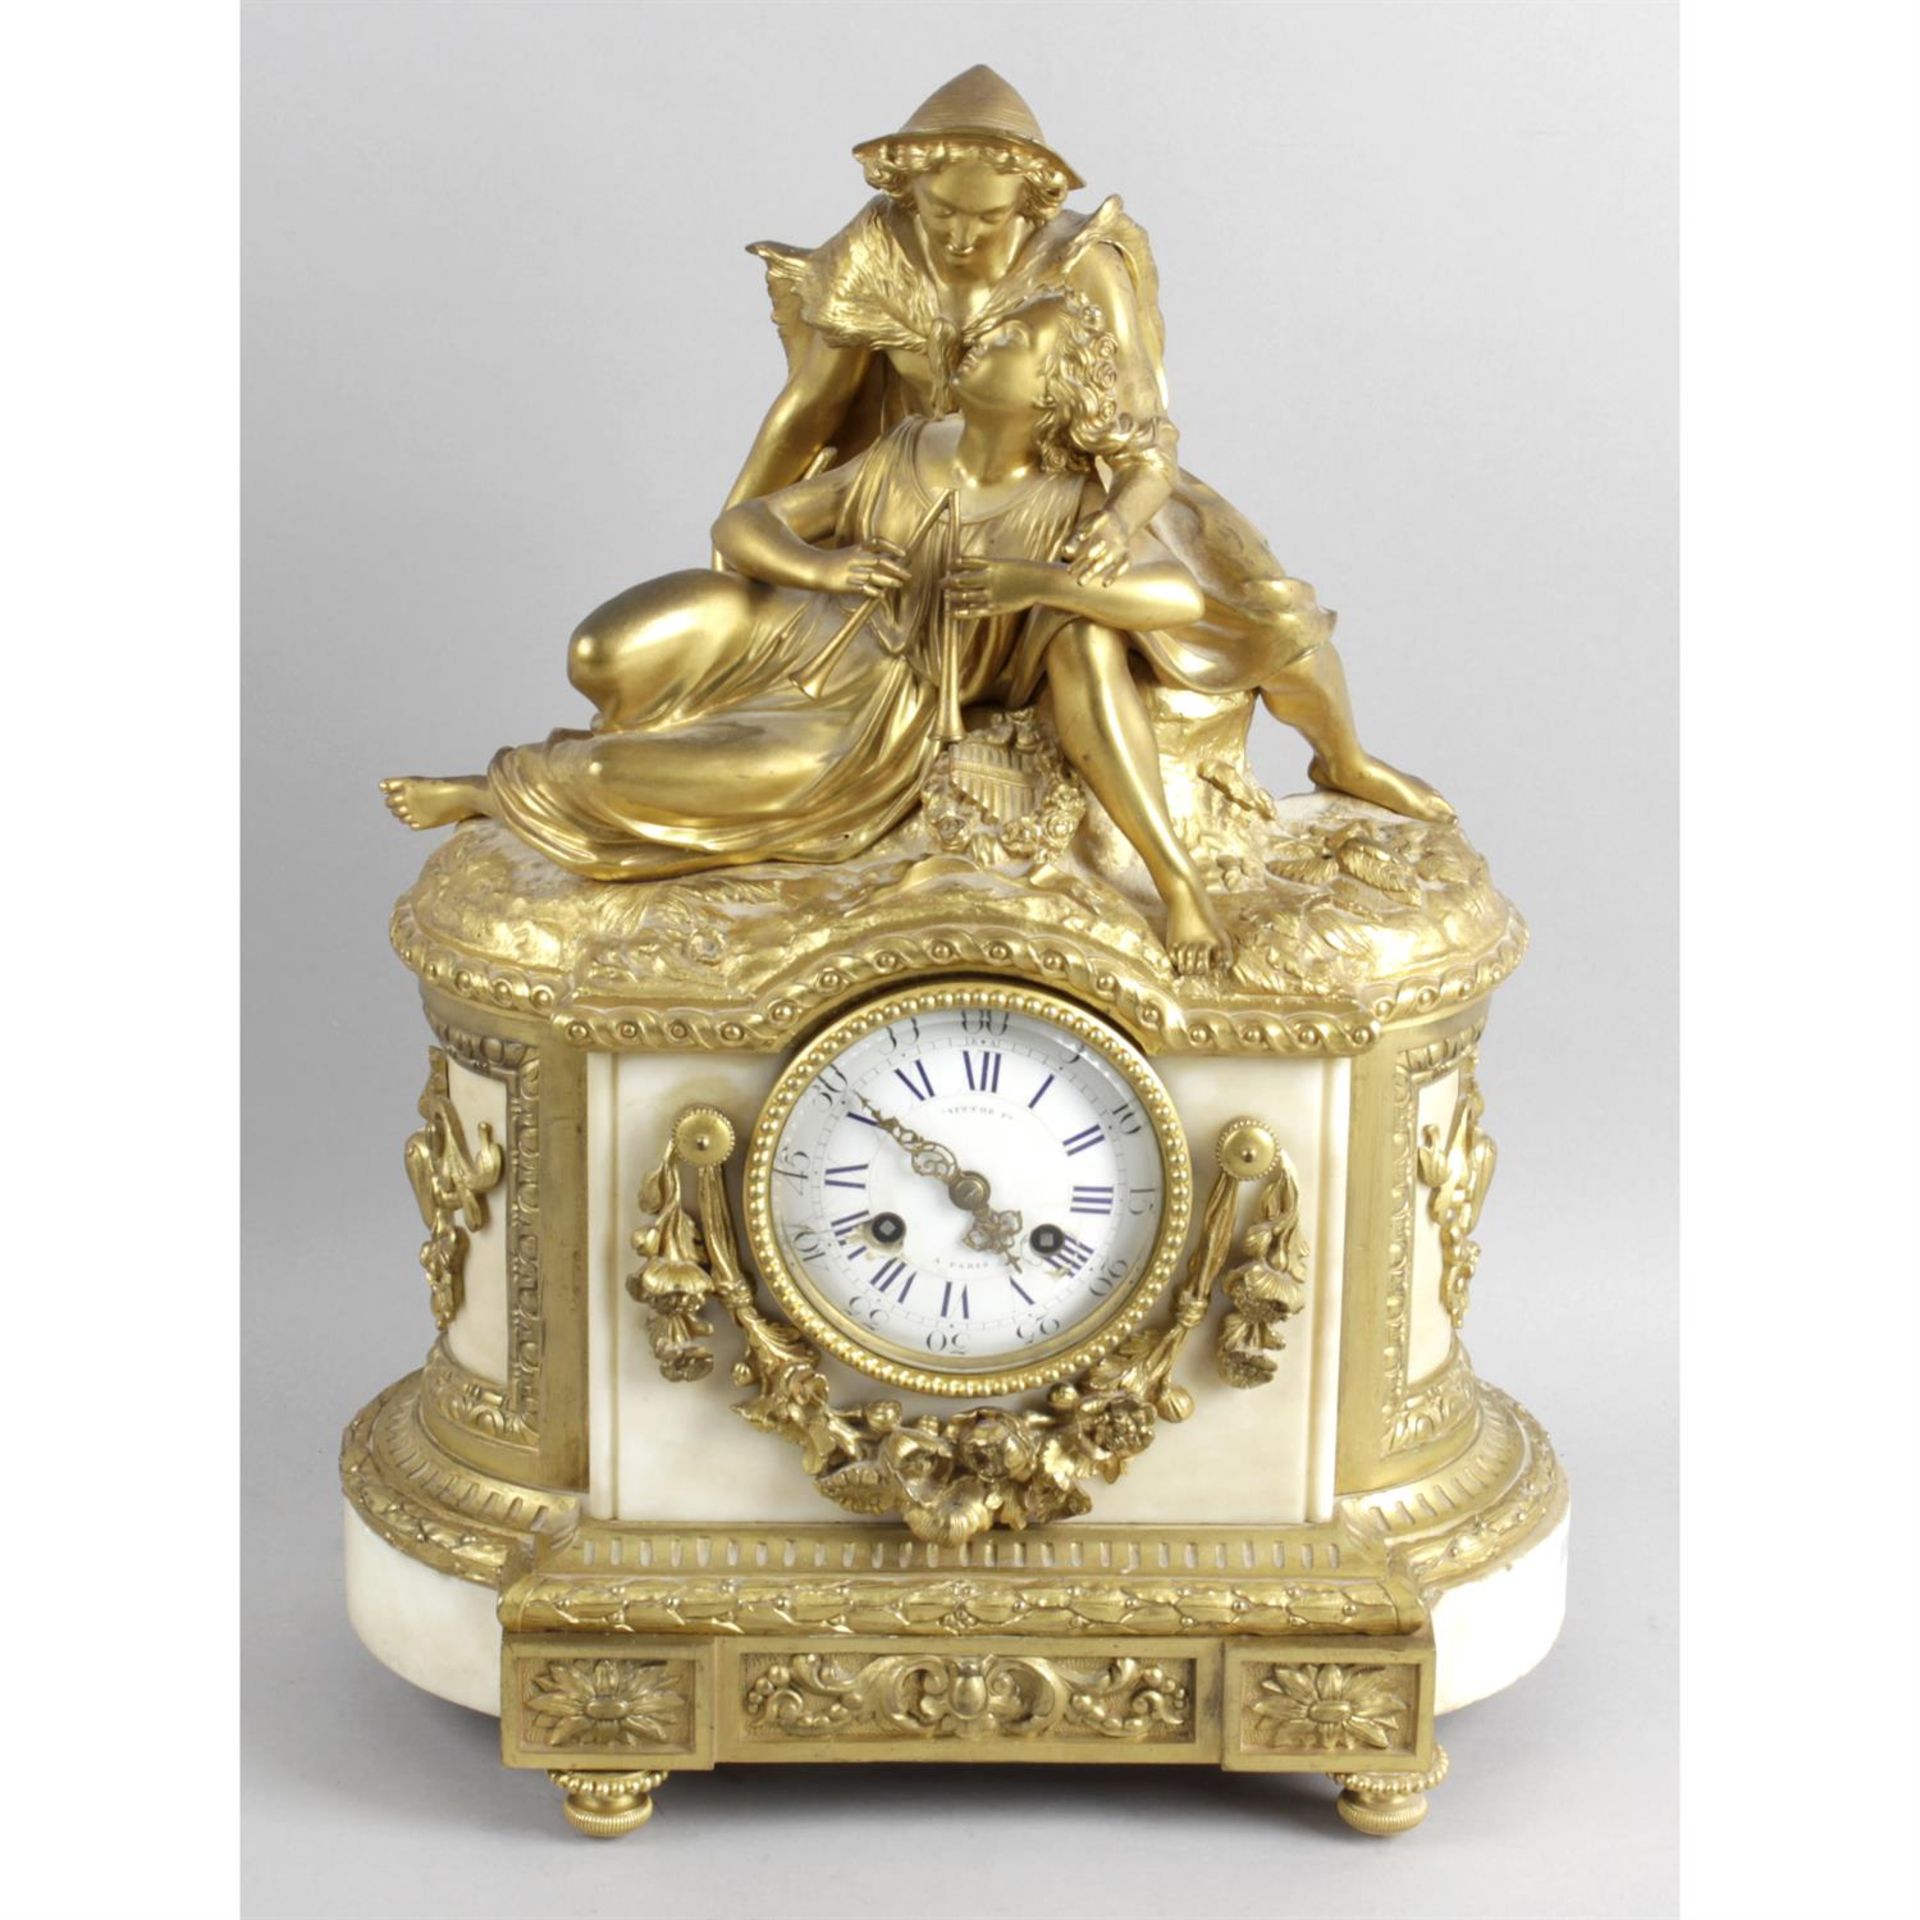 Late 19th century gilt bronze and white marble cased mantel clock.